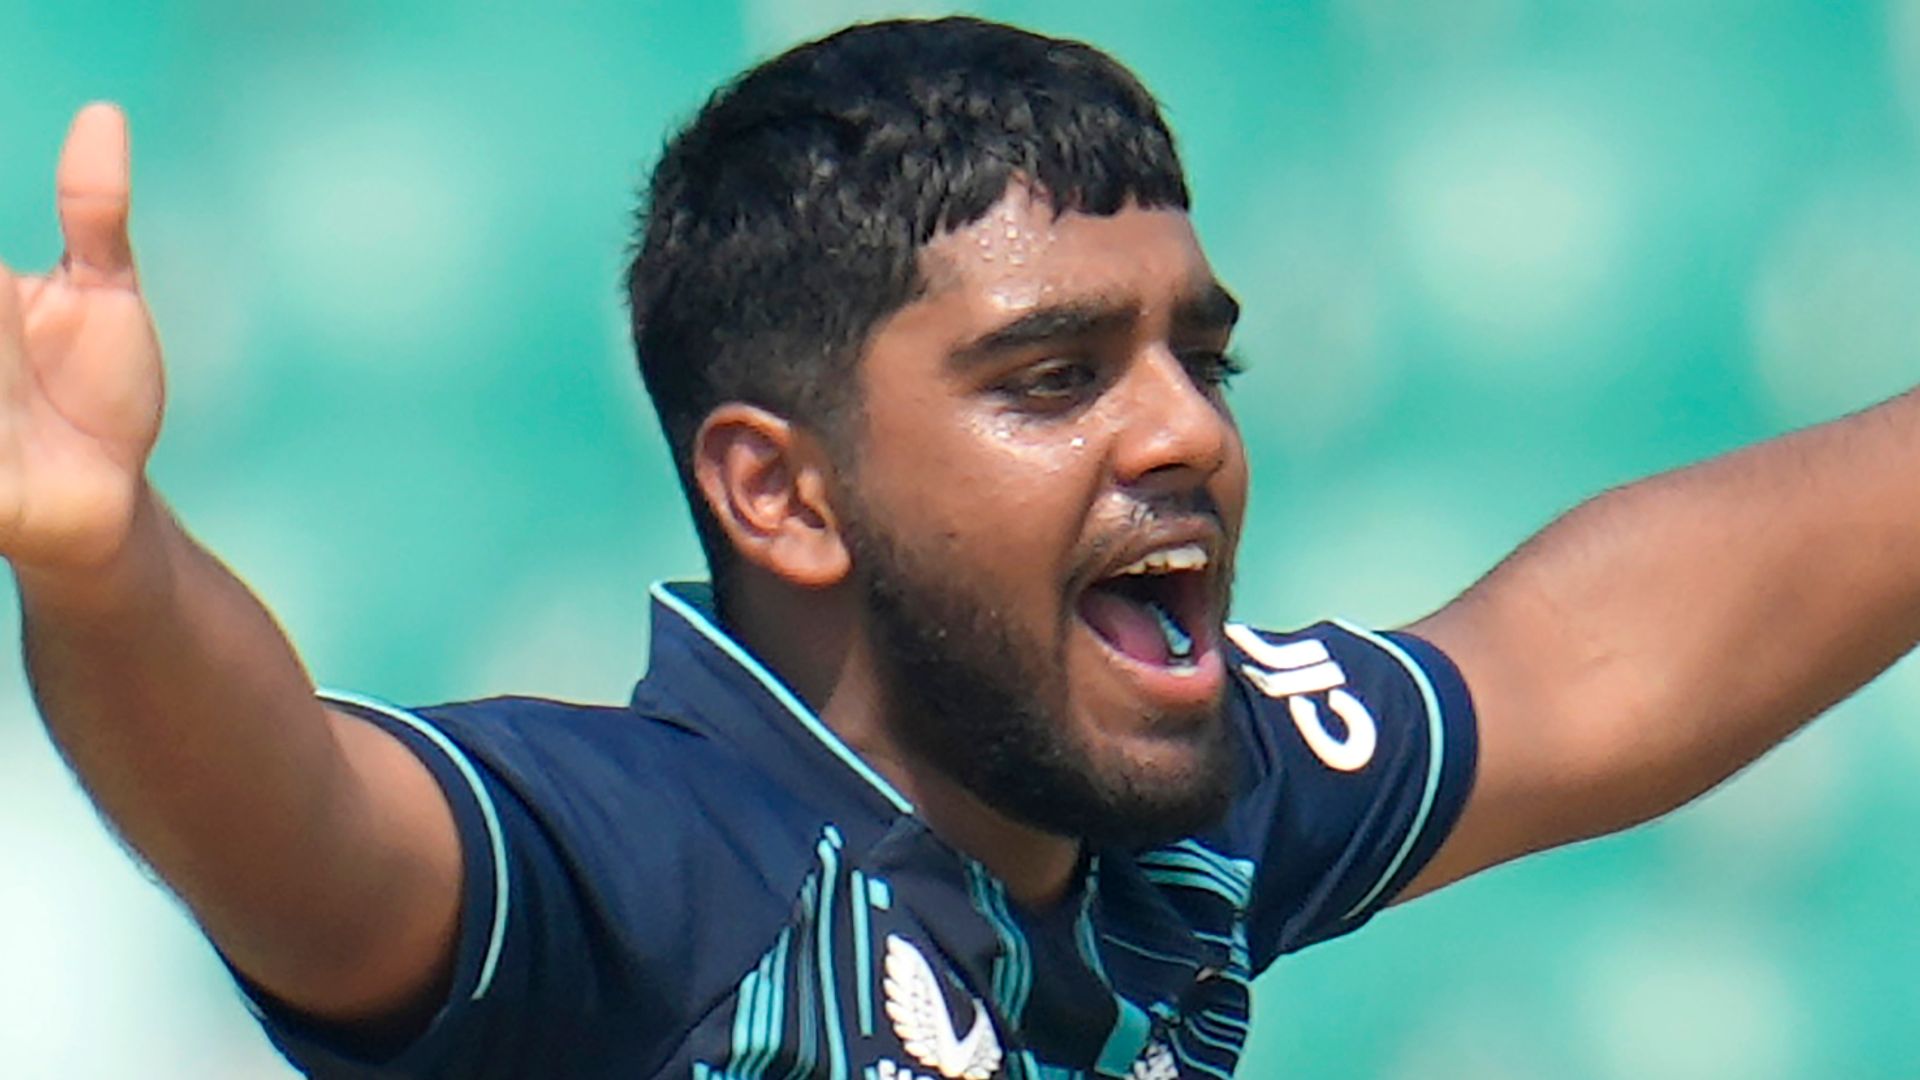 England chasing 247 to win as Ahmed takes wicket on debut LIVE!